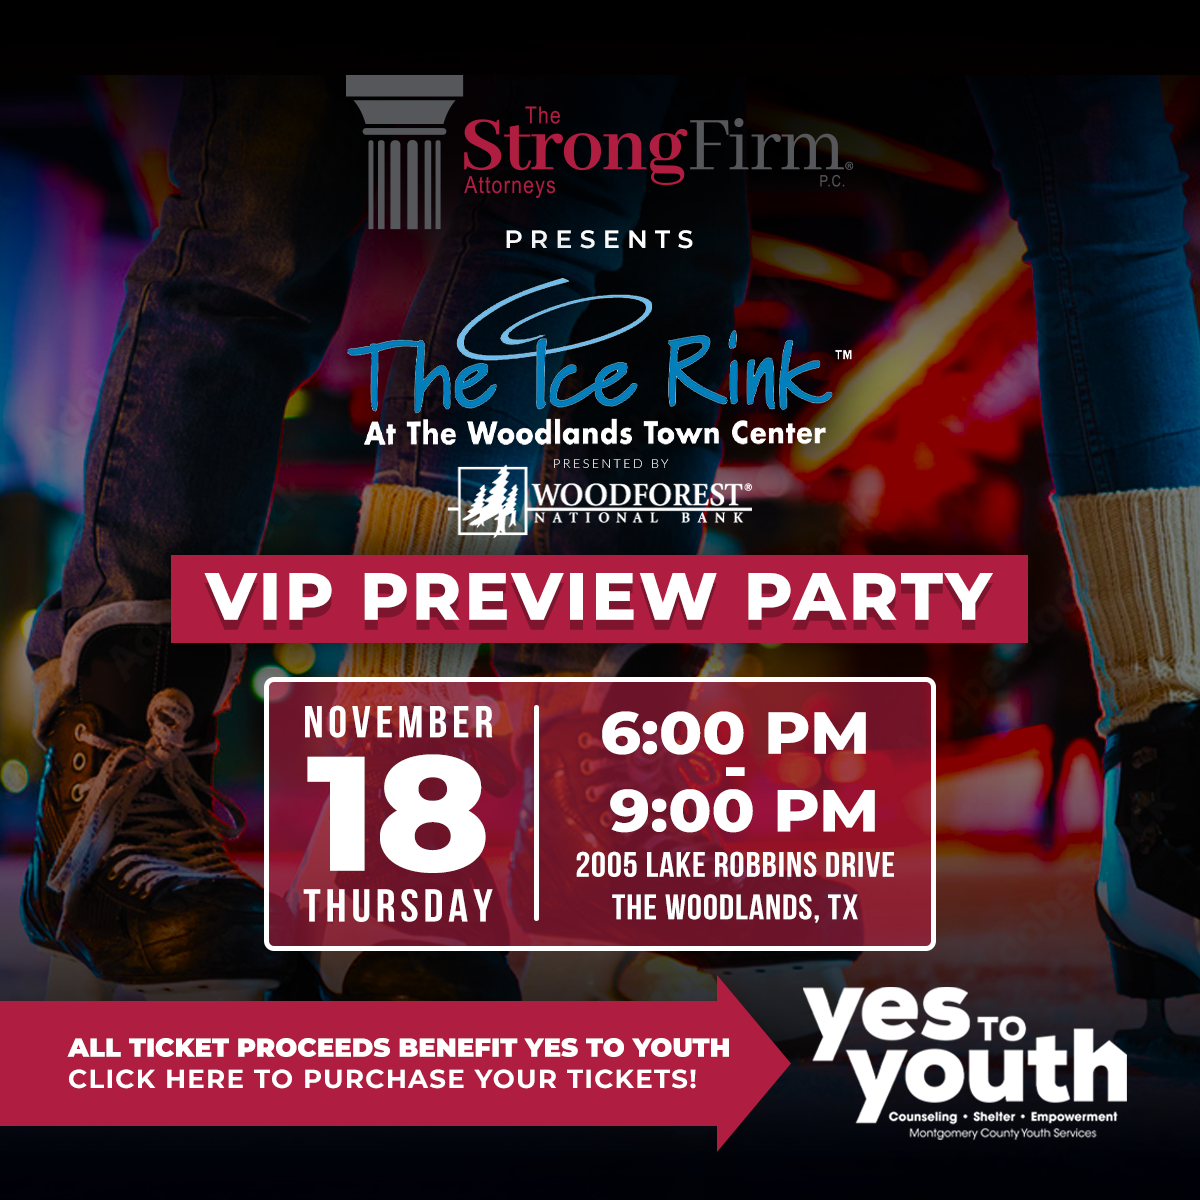 The Strong Firm P.C. Presents The Ice Rink At The Woodlands Town Center – VIP Preview Party – Thursday, November 18, 2021 – 6 PM-9PM CST